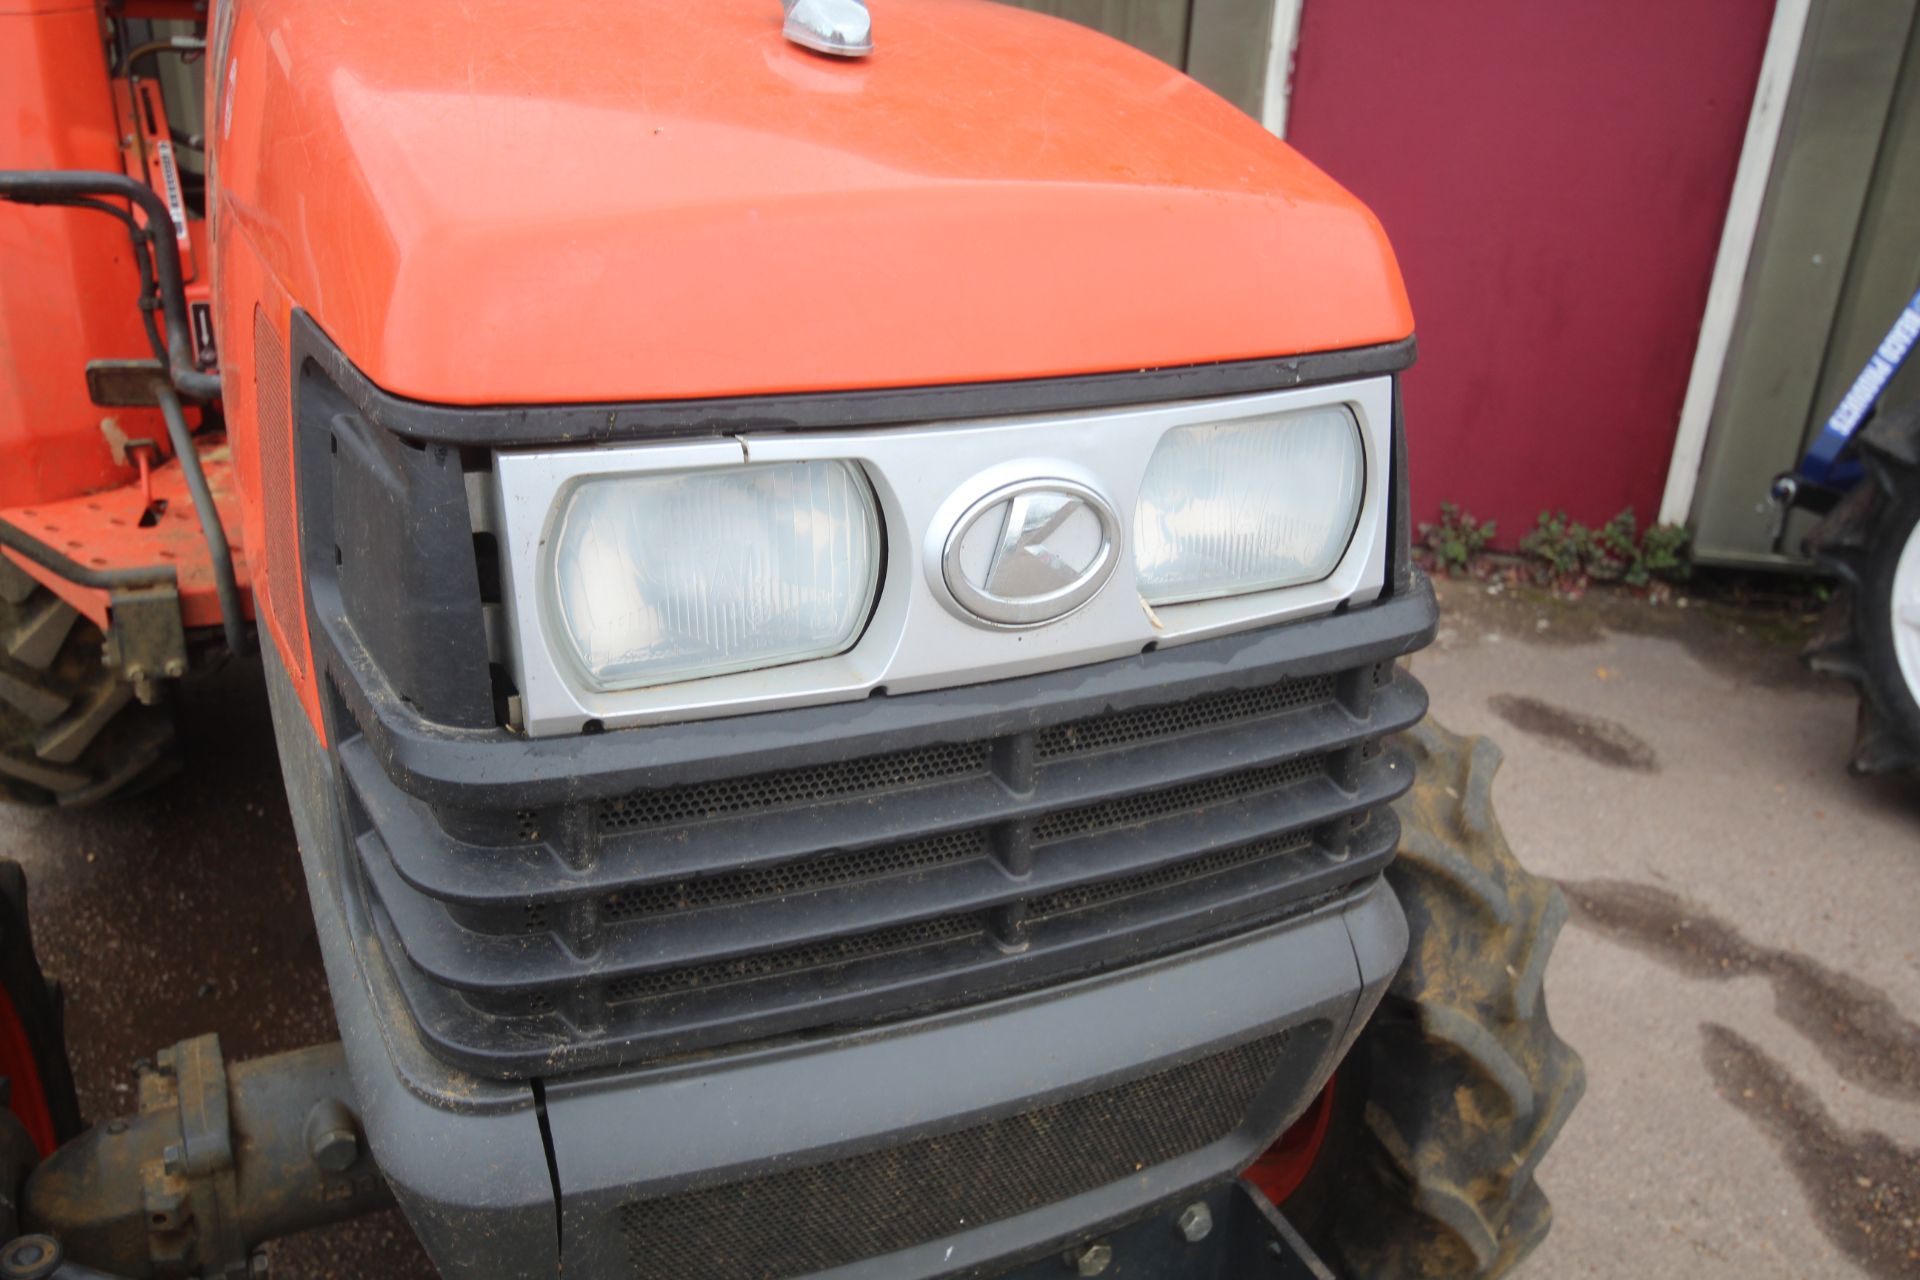 Kubota L3200 4WD compact tractor. Registration AY15 CYZ. Date of first registration xx/xx/2015. - Image 4 of 30